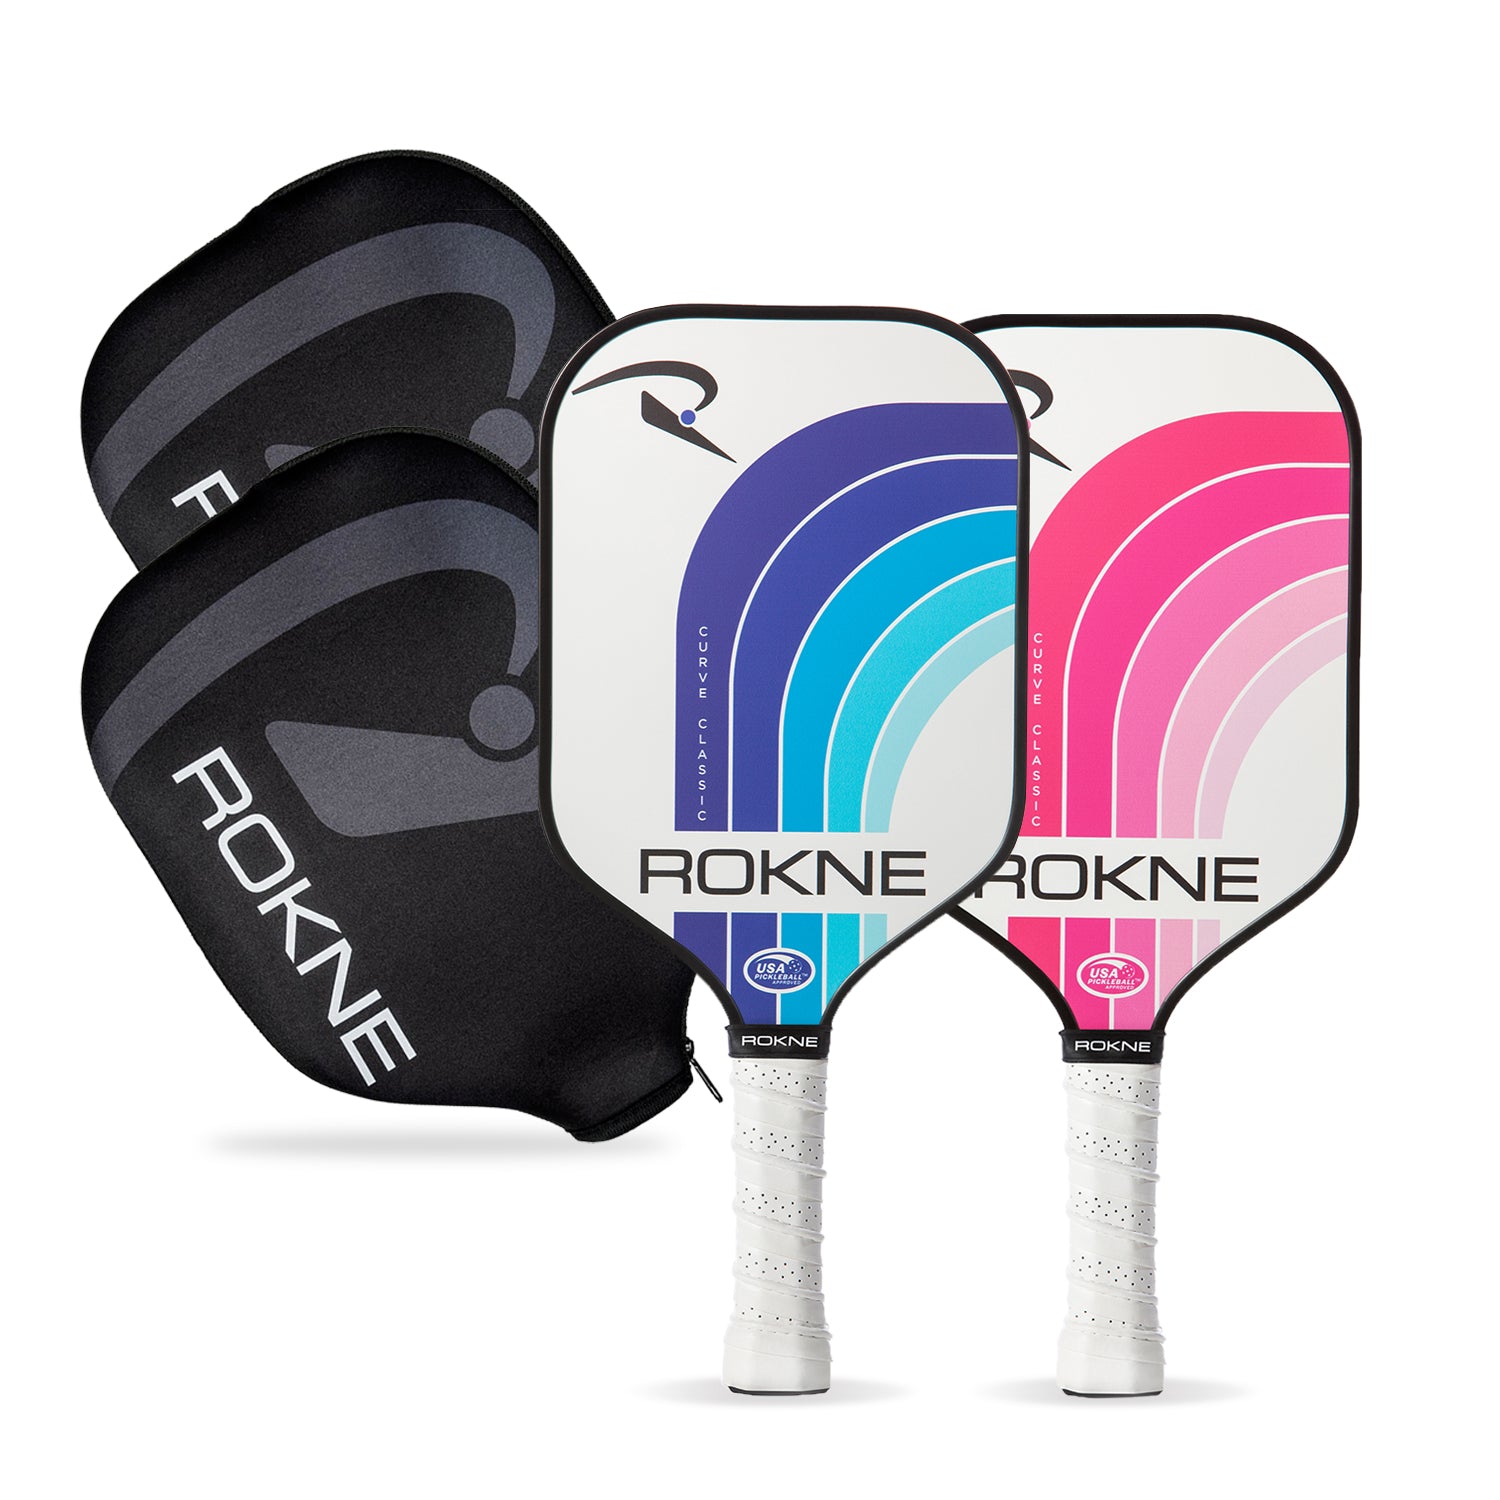 ROKNE Curve Classic Pickleball Paddle Set - The His & Her Set (Paddle Covers Included)